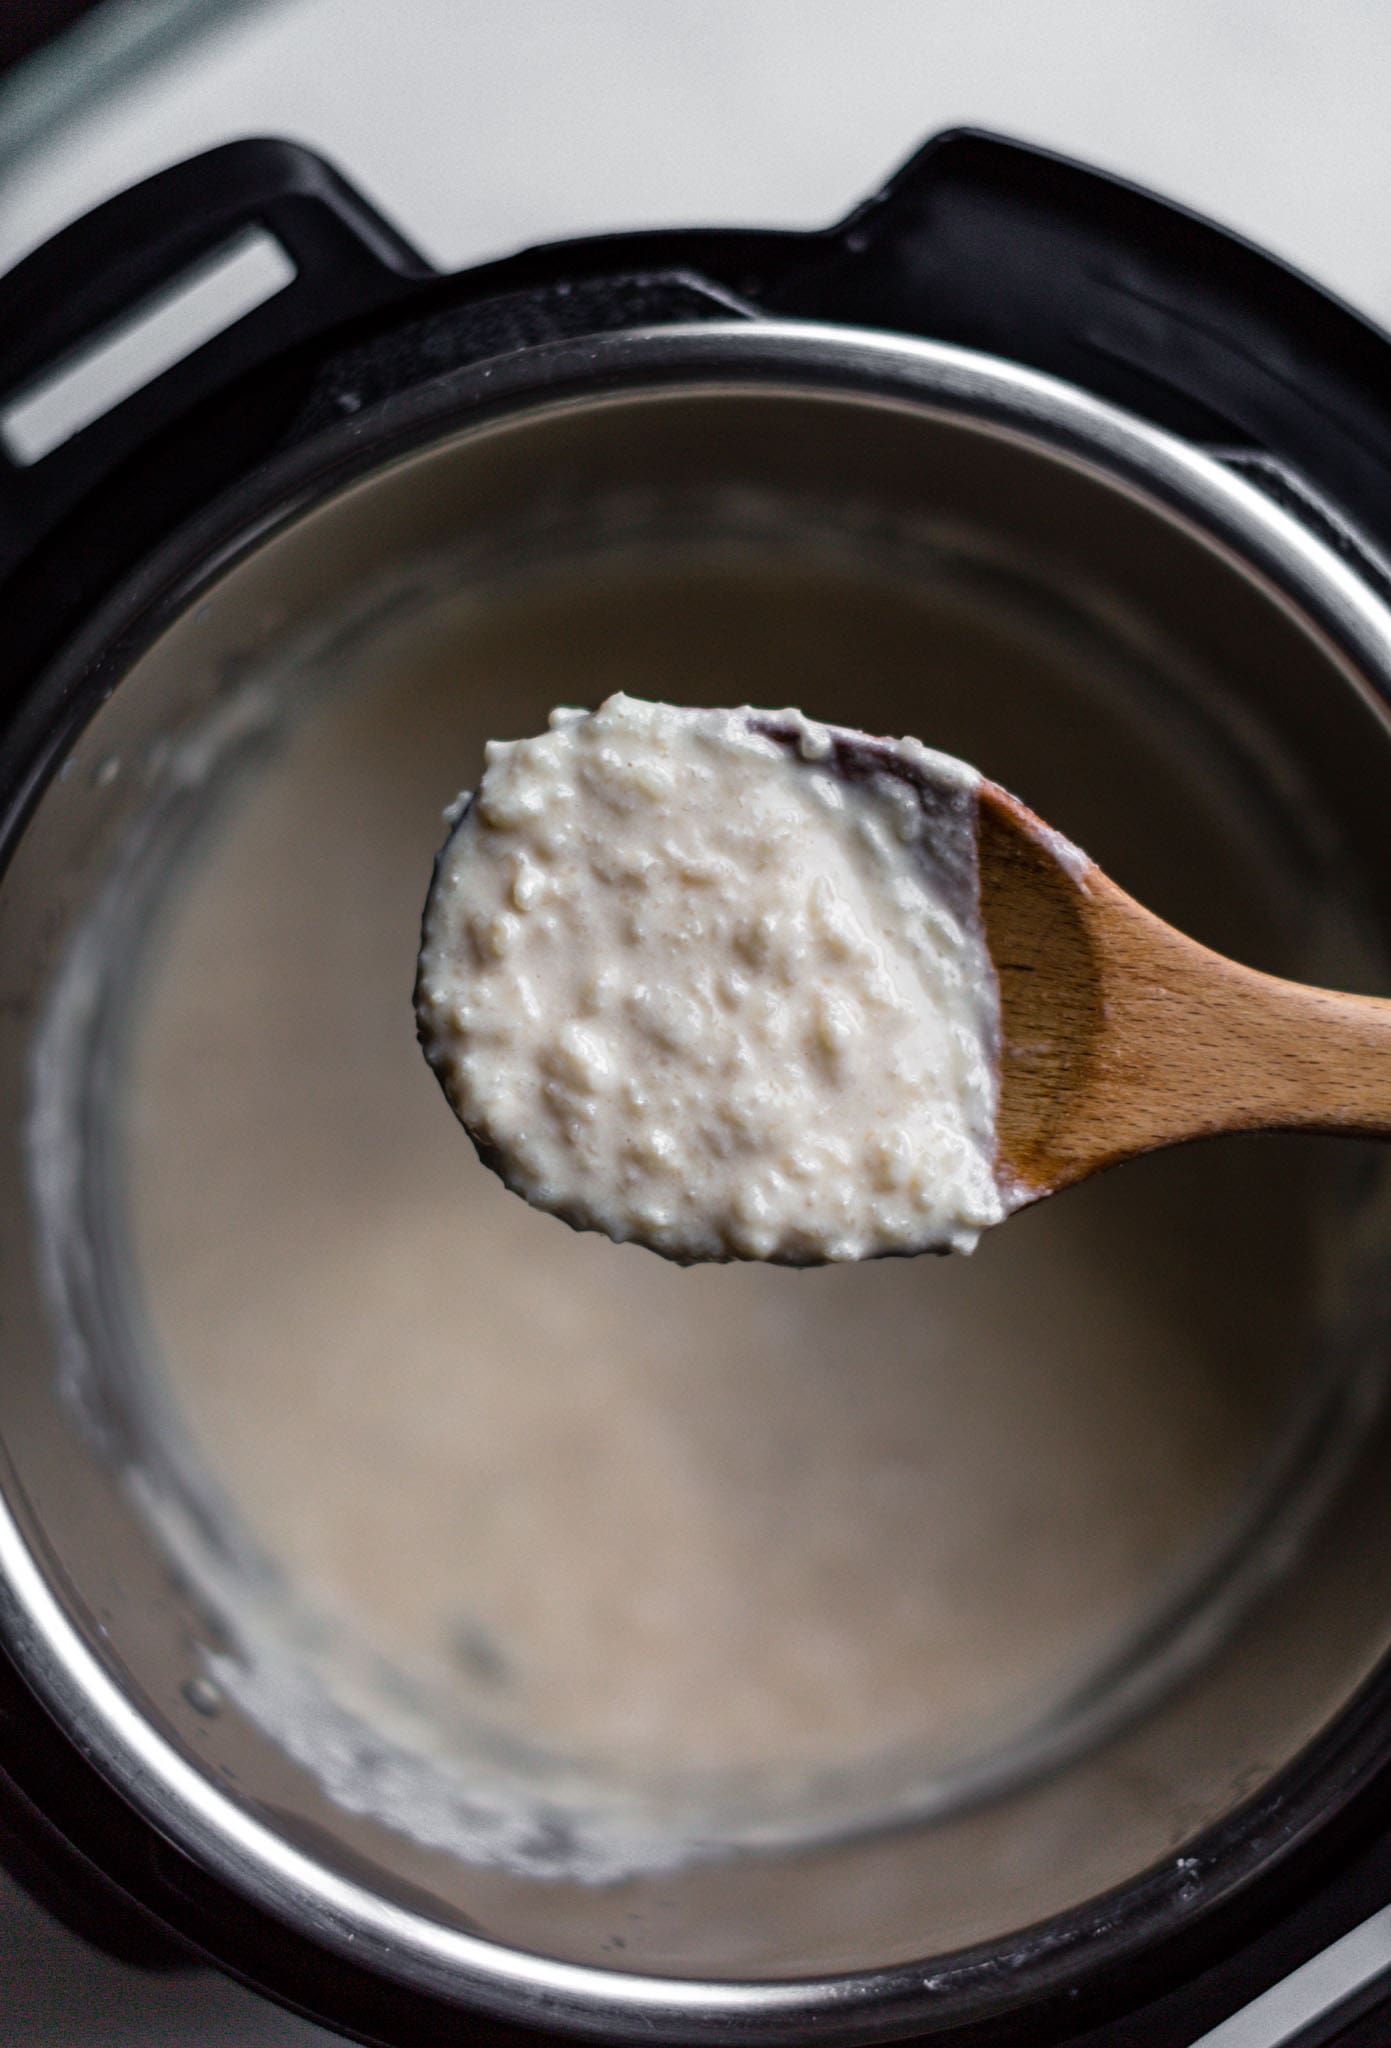 Showing texture of Instant Pot kheer on a wooden spoon